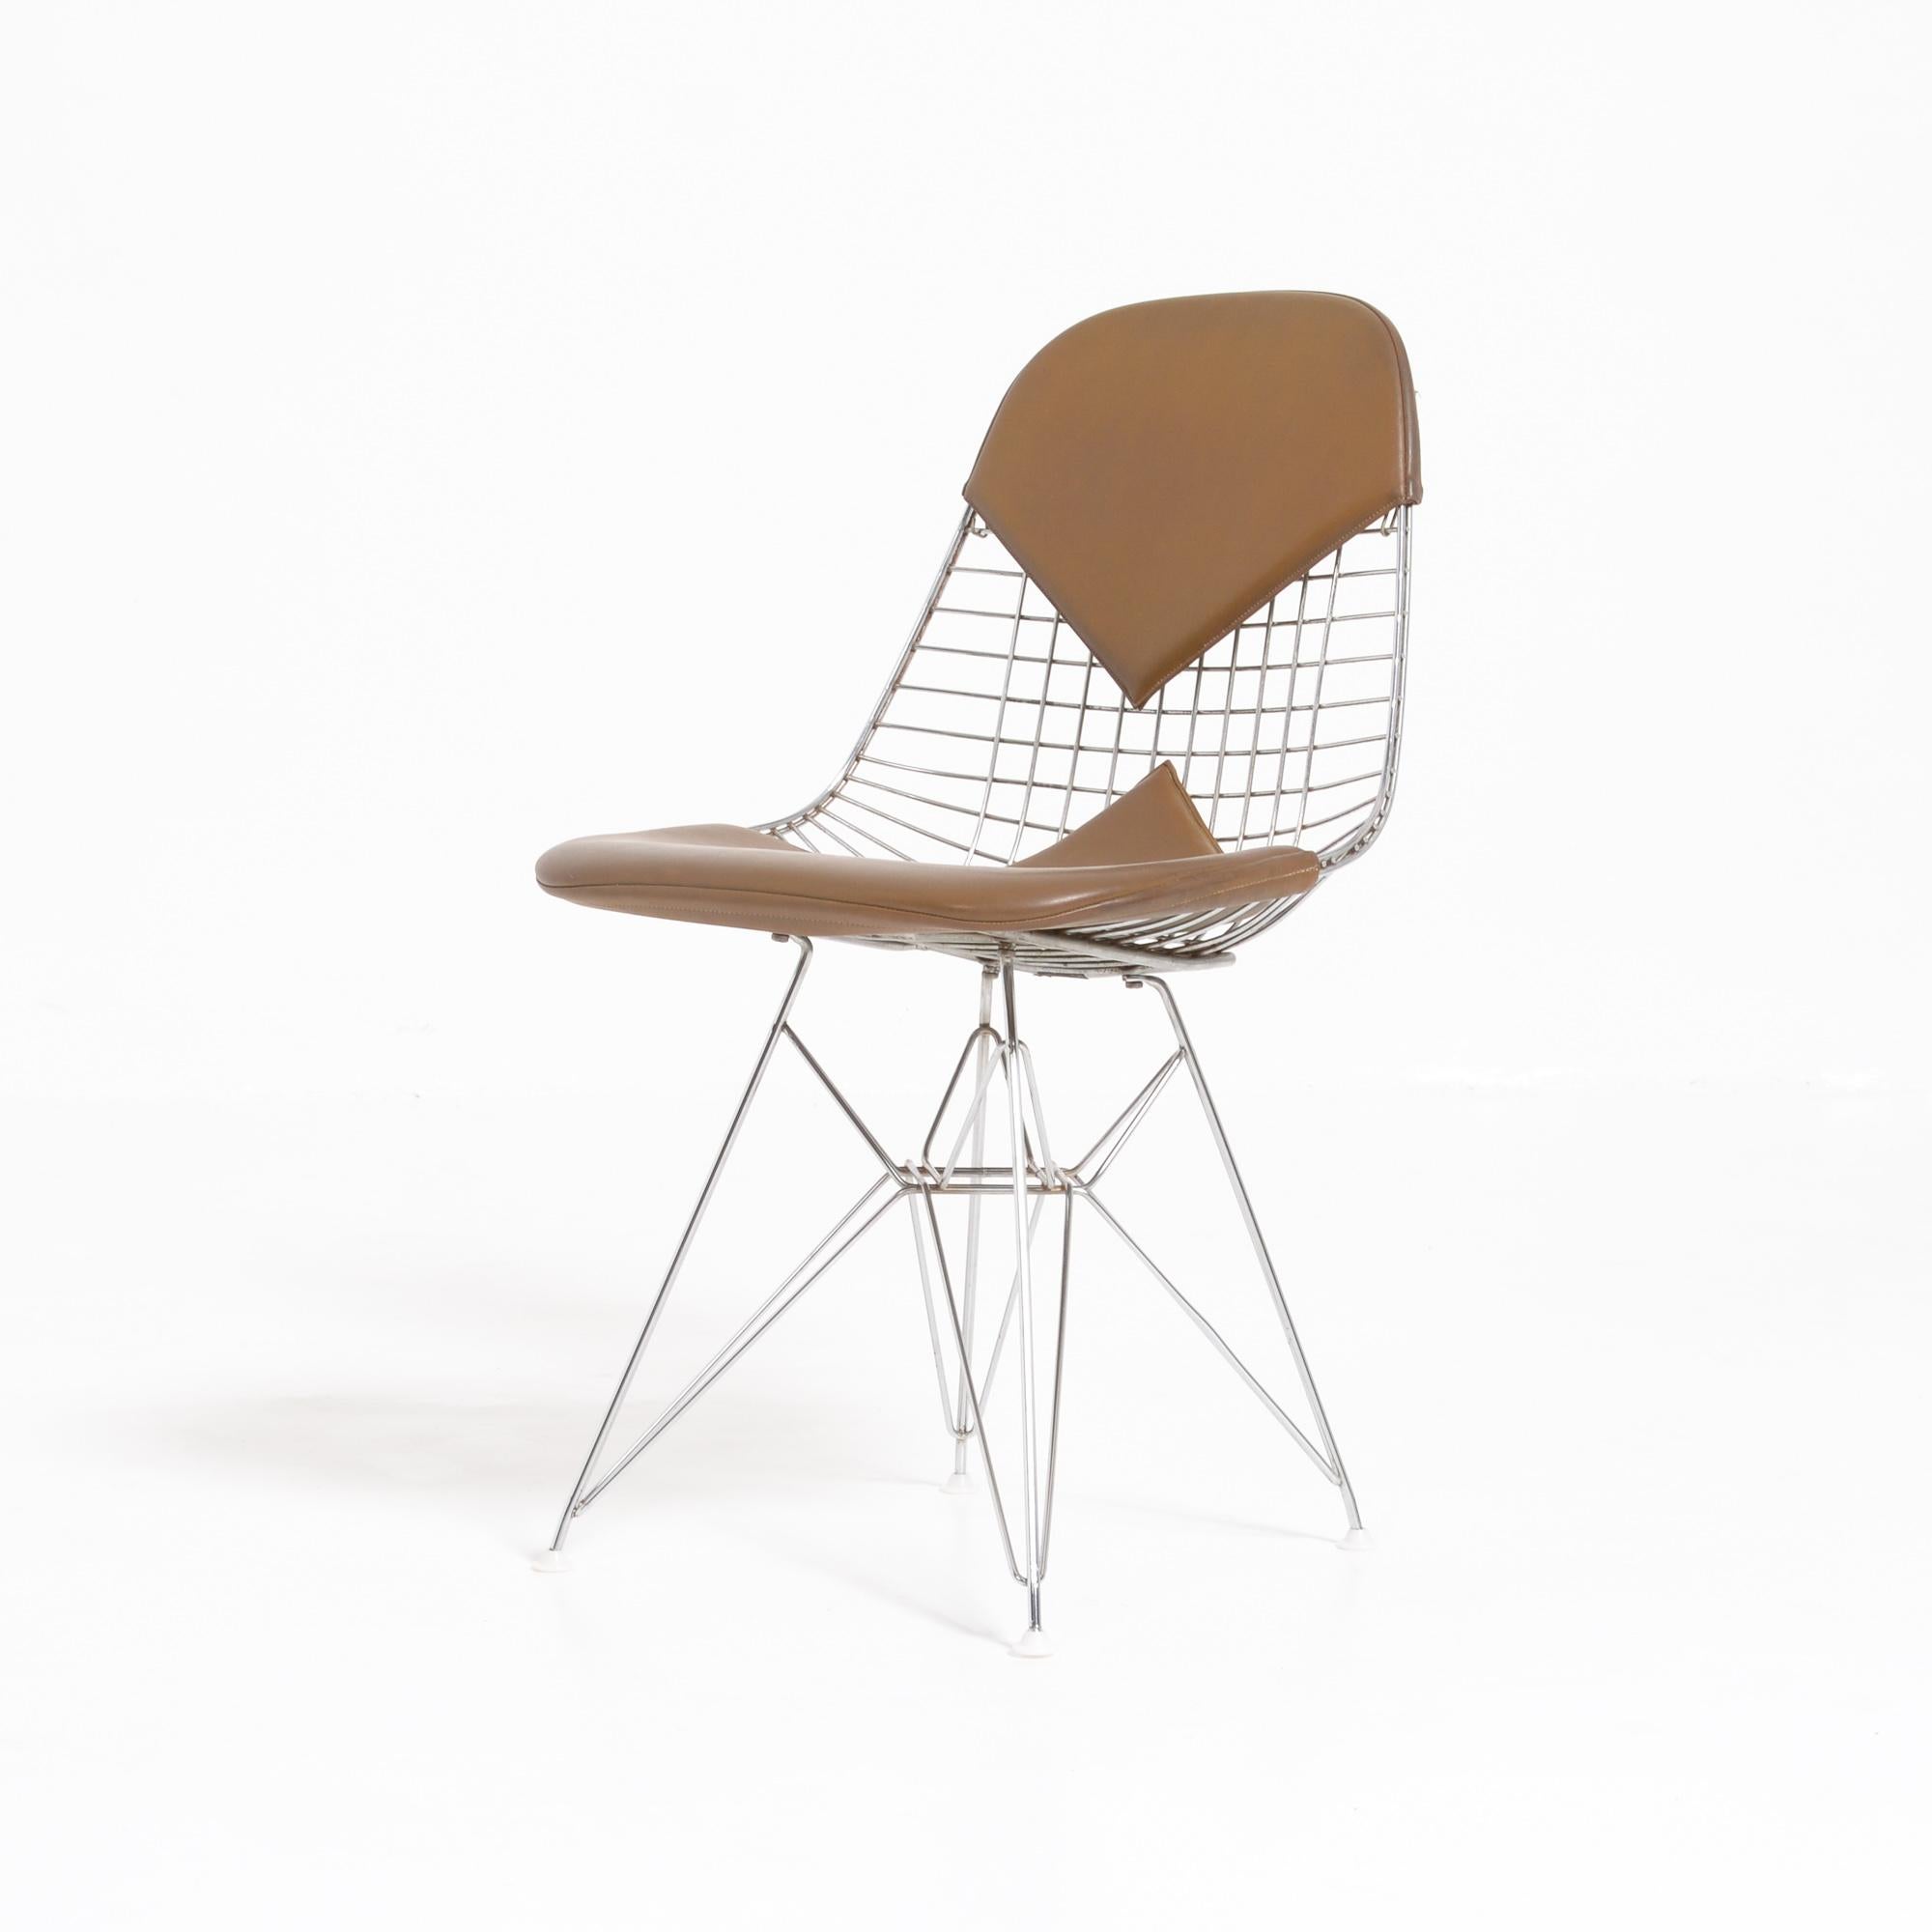 Mid-20th Century DKR Wire Chairs 'Bikini' by Eames for Herman Miller